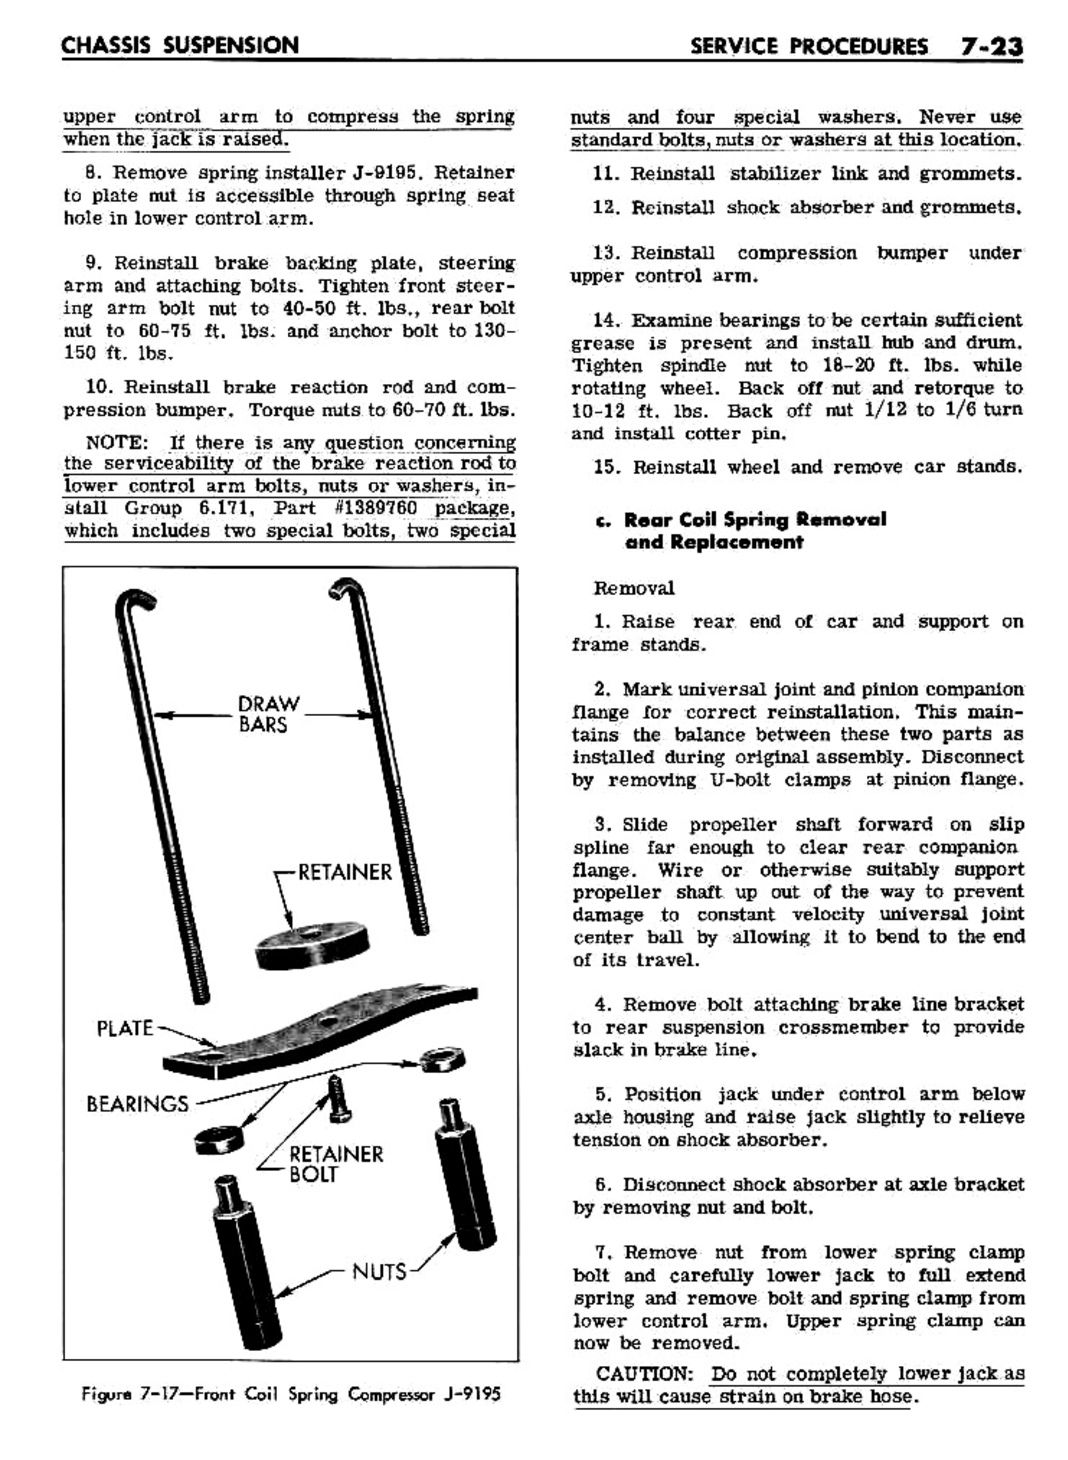 n_07 1961 Buick Shop Manual - Chassis Suspension-023-023.jpg